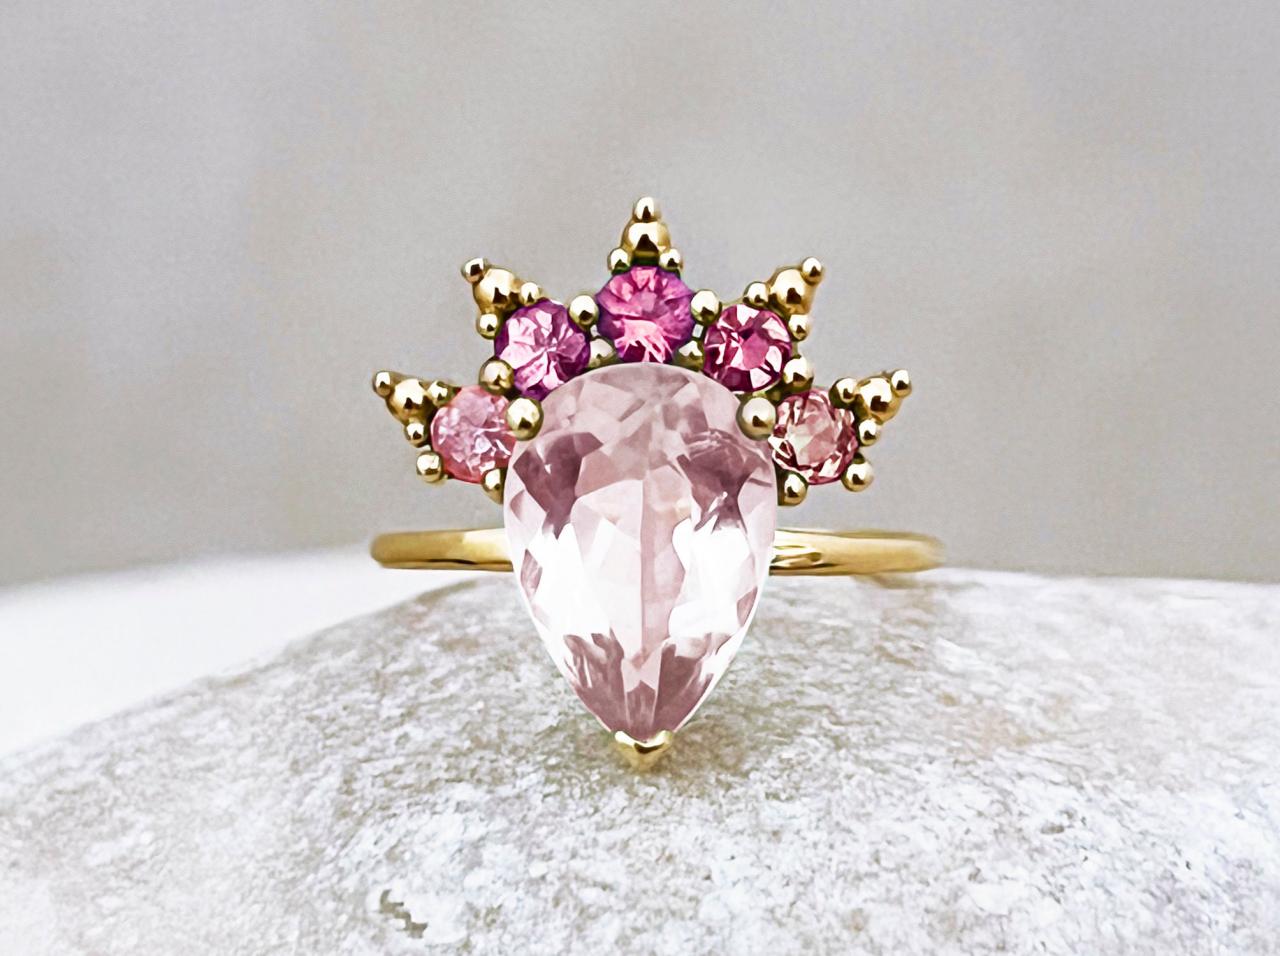 Statement solid gold ring with pink quartz, Pear cut natural tourmaline engagement ring, 18k gemstone crown promise ring